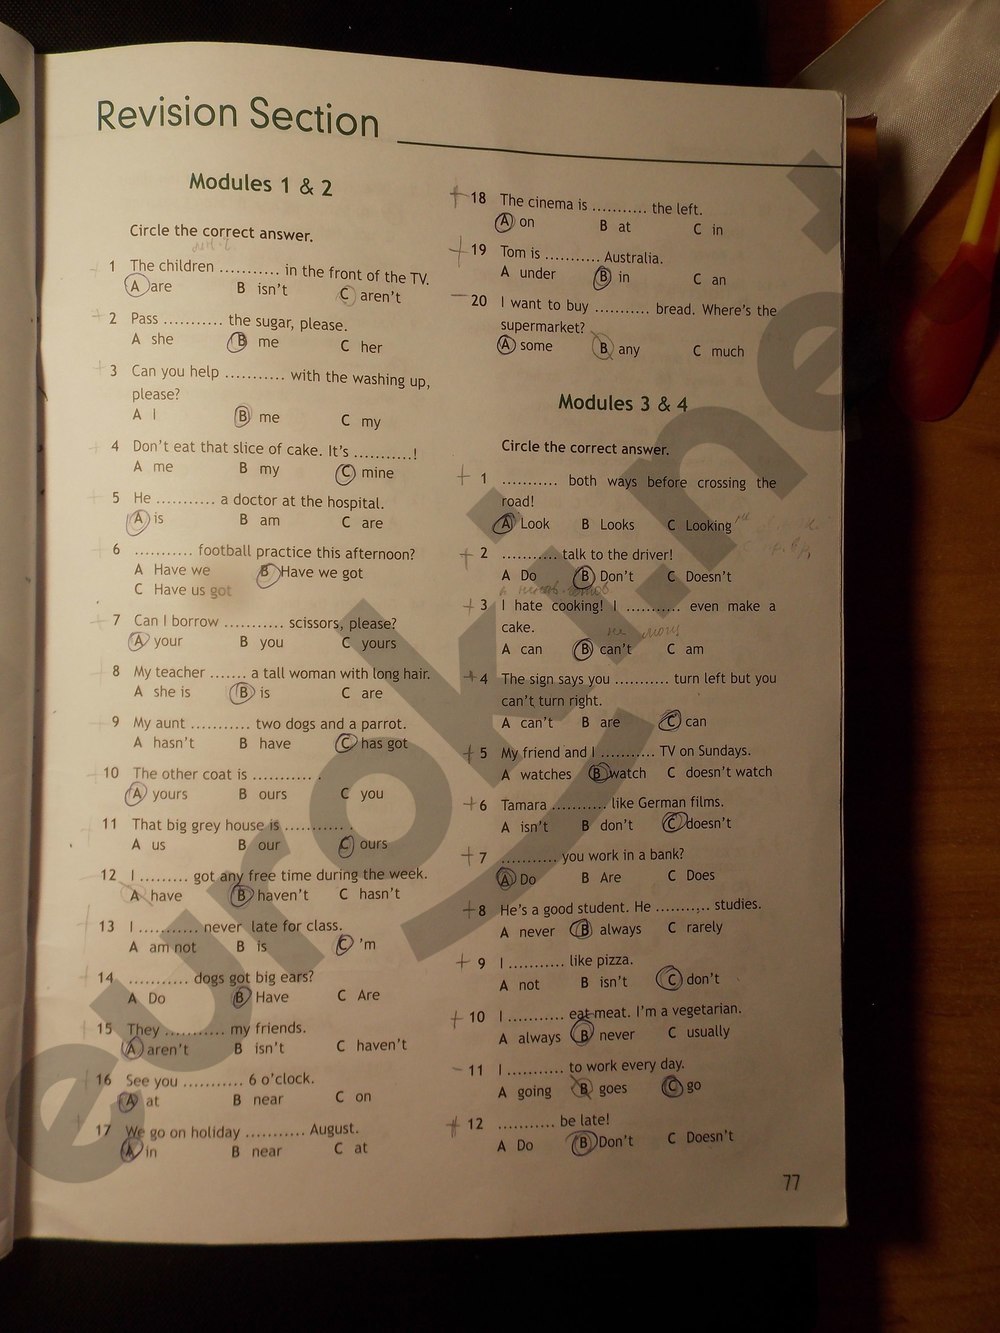 Английский 6 класс воркбук страница 6. Revision Section. Revision Section 6 класс Modules 1 2. Circle the correct answer 6 класс. Английский язык revision Section Modules 1 2.